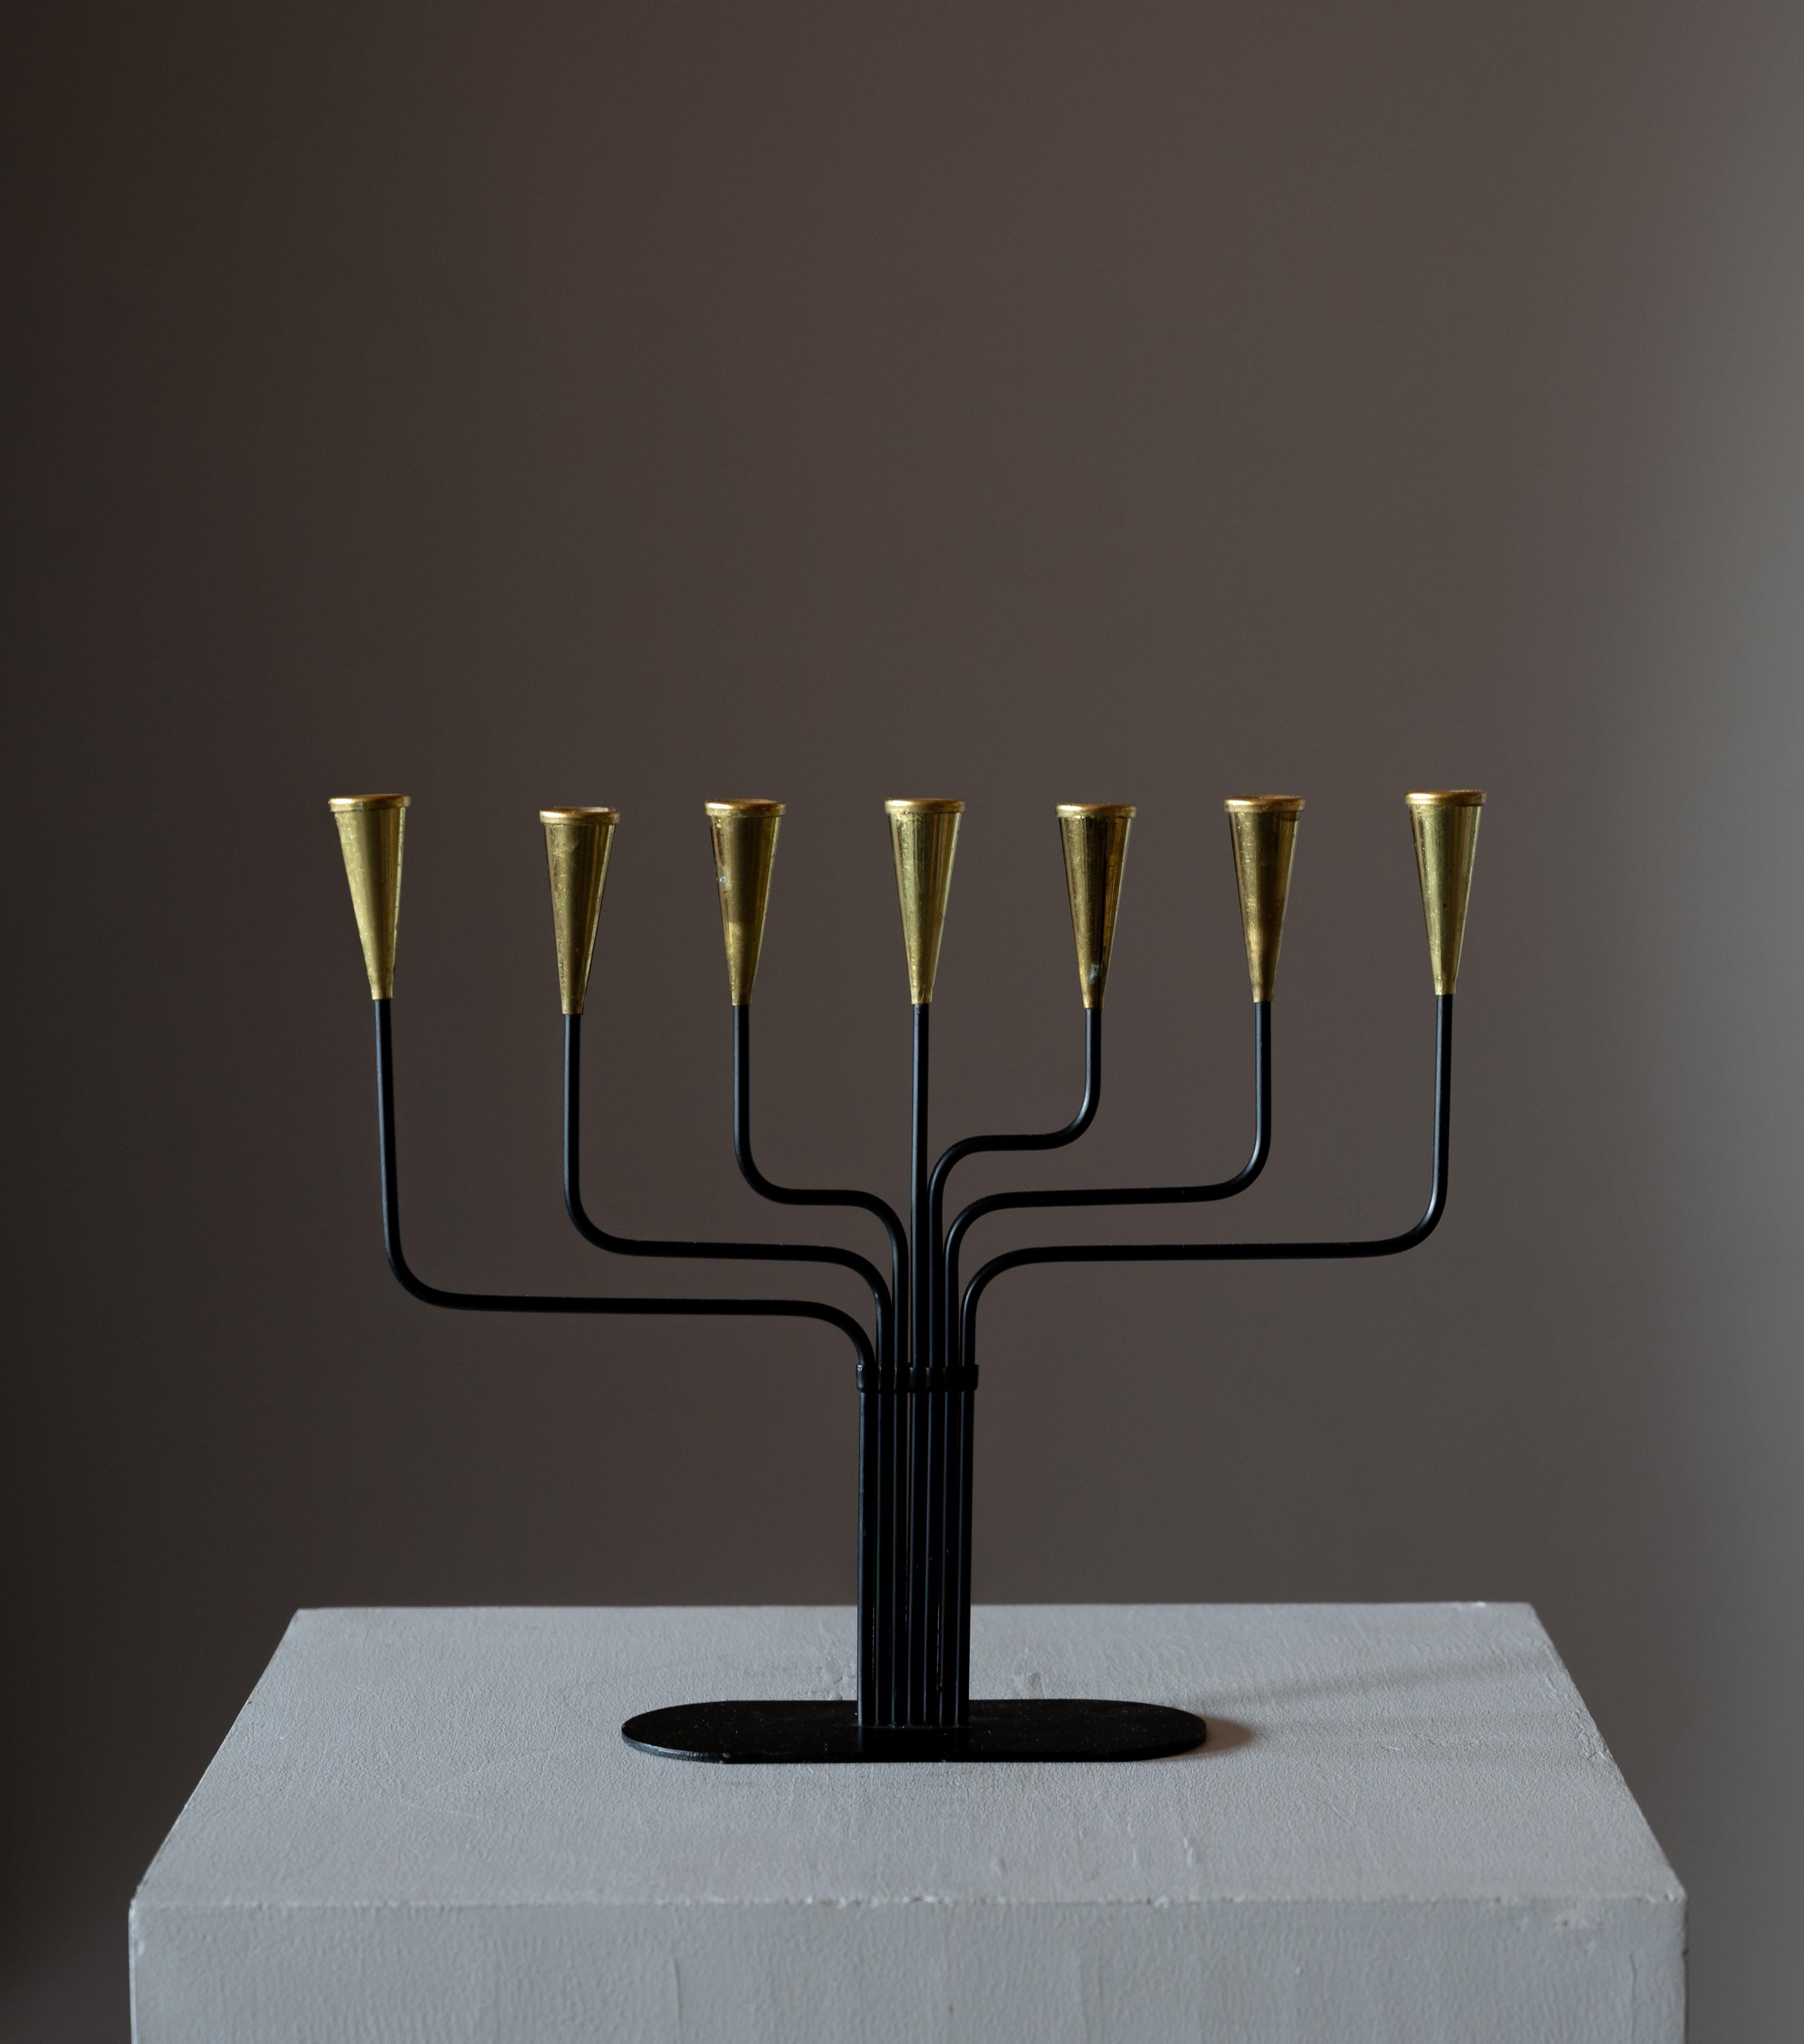 A candelabra, designed by Gunnar Ander for Ystad Metall, Sweden, 1950s. In brass. Stamped. For small candles.

Other designers of the period include Piet Hein, Paavo Tynell, Josef Frank, and Jean Royere.

